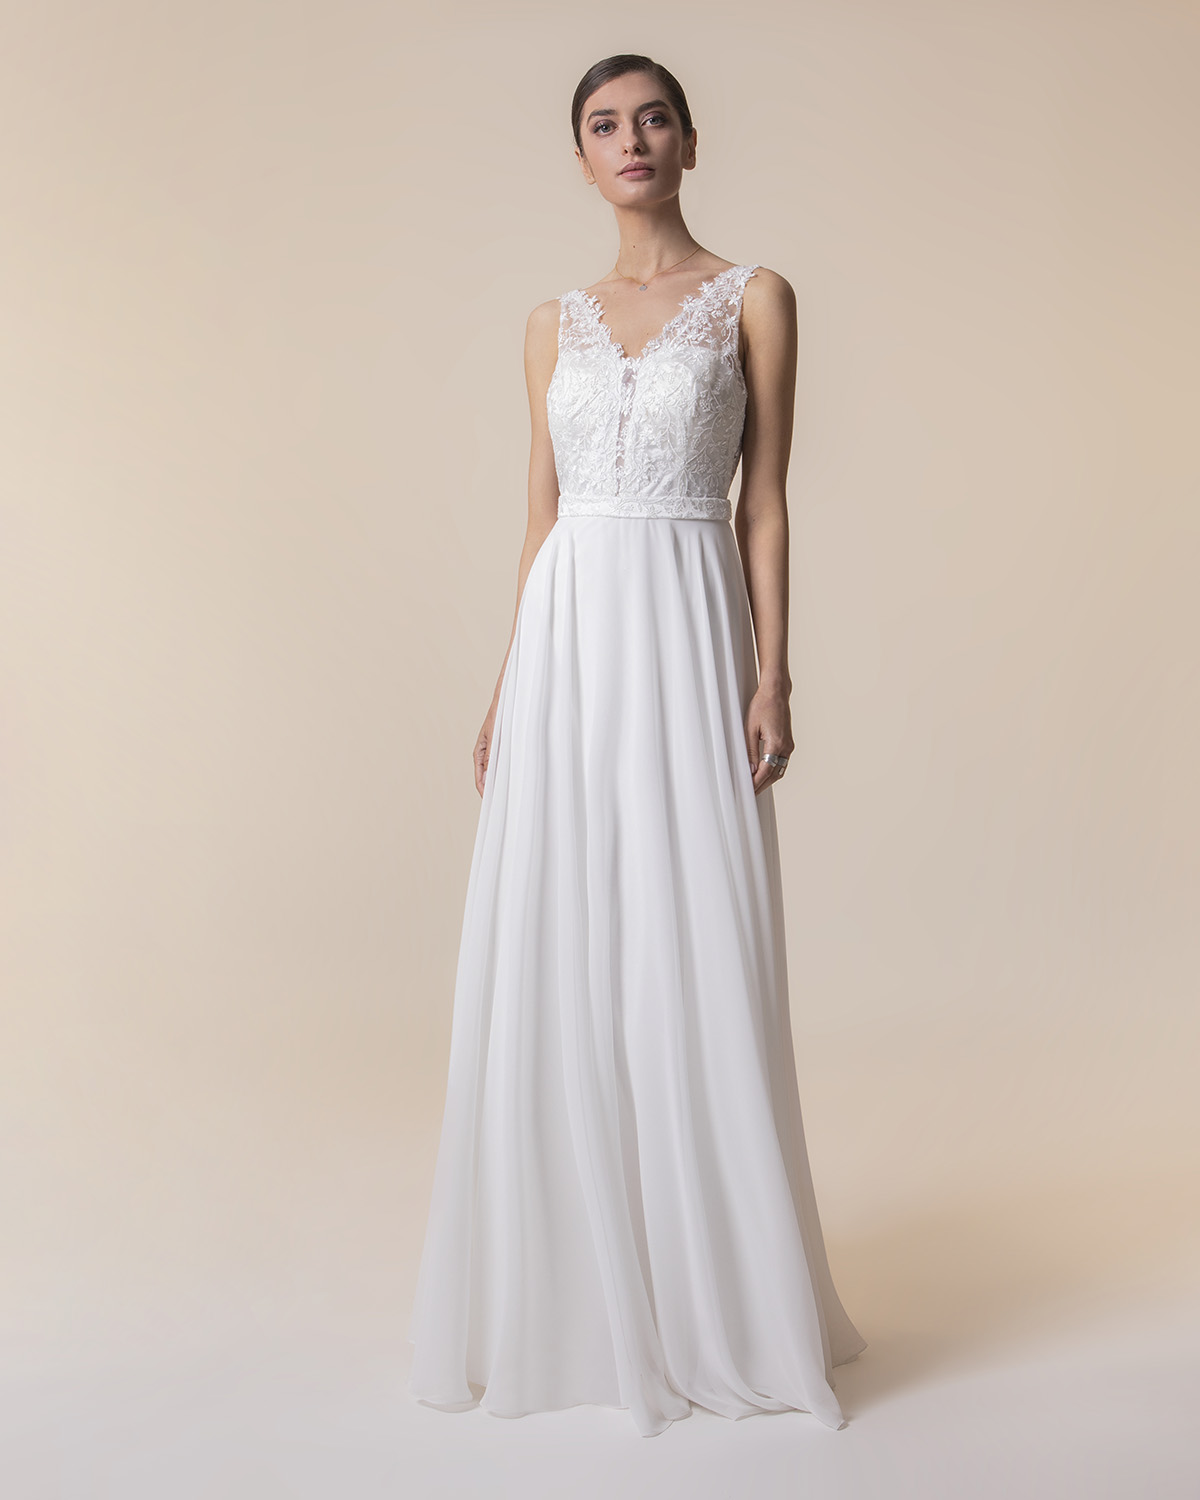 Evening Dresses / Long evening wedding dress with chiffon fabric and lace top